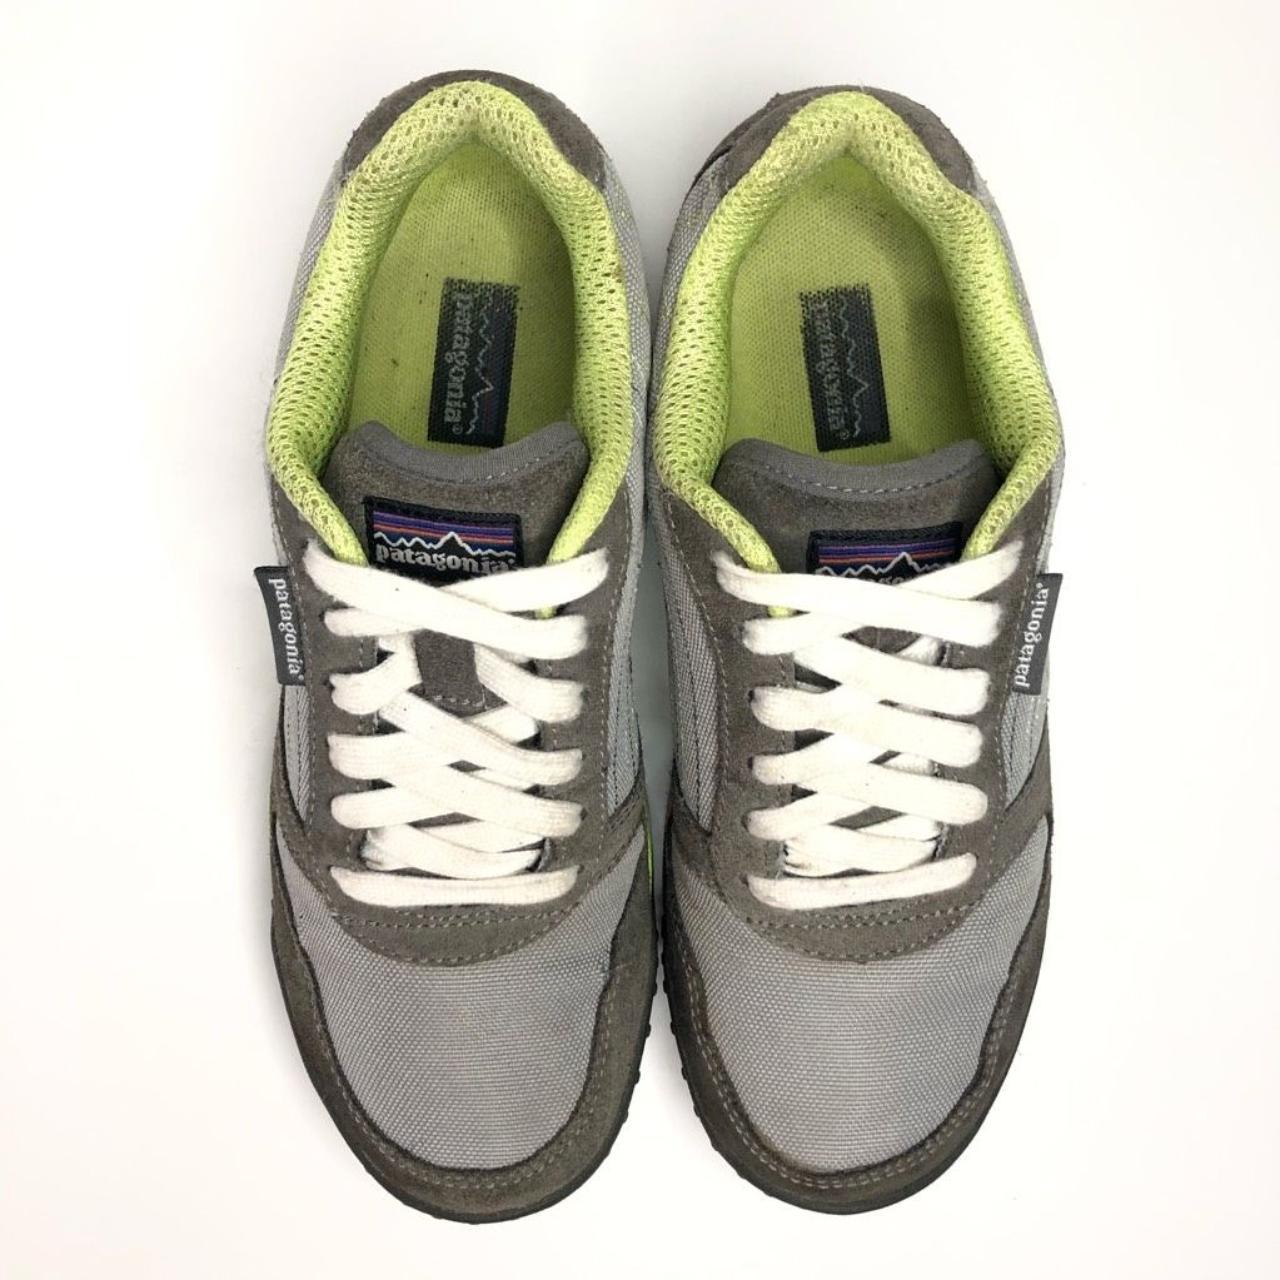 Patagonia Fitz Sneaks Sneakers Shoes Gray Leather... - Depop